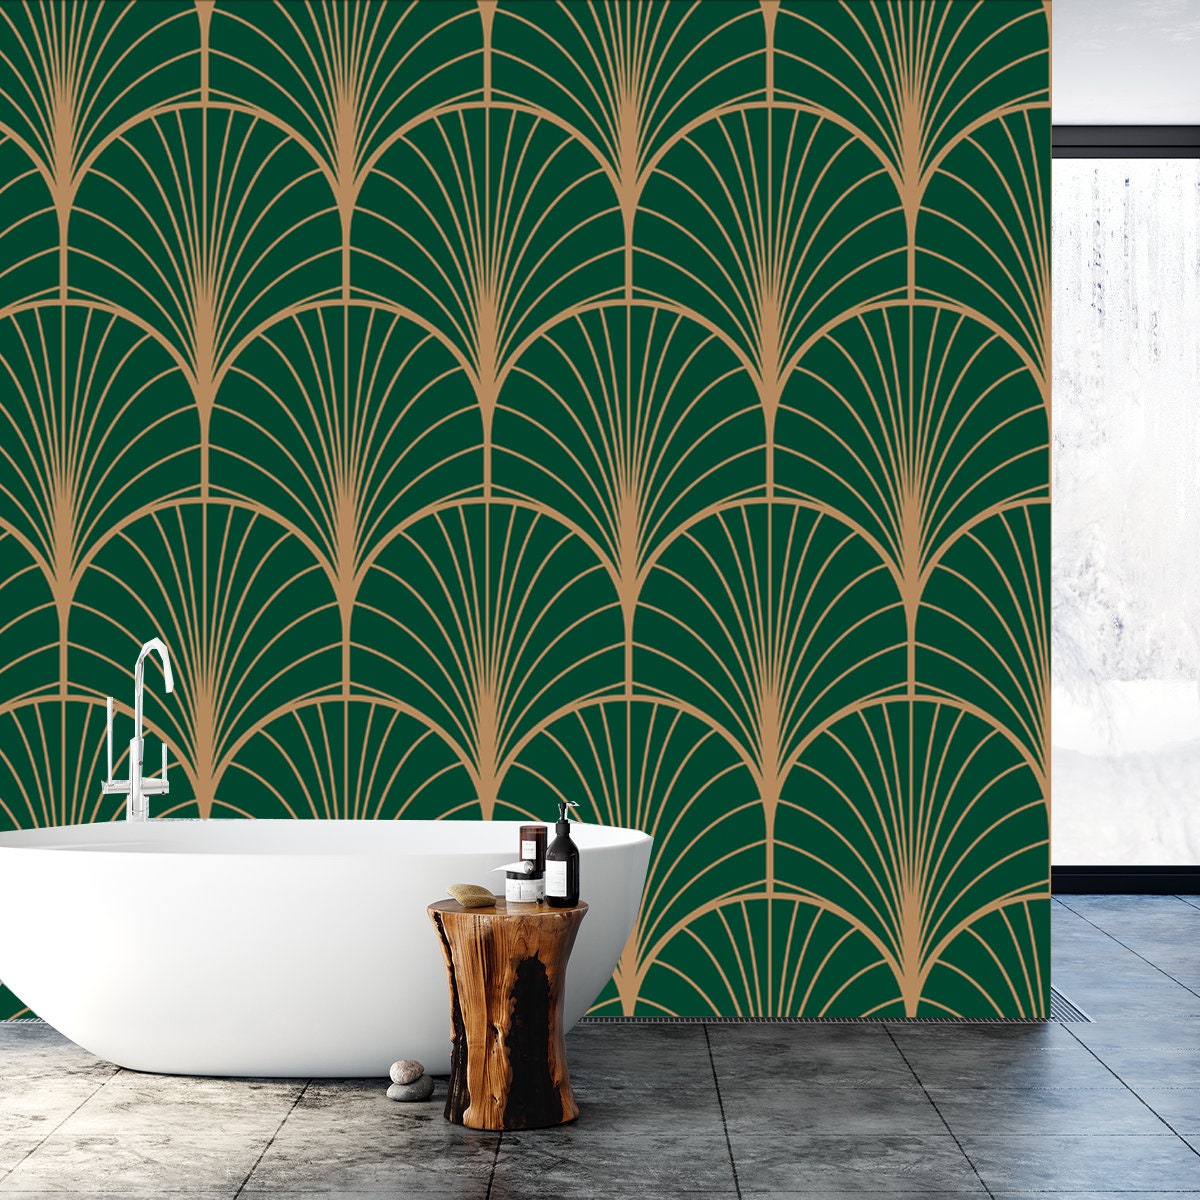 Art Deco Geometric Seamless Vector Pattern. Gold and Green Peacock Abstract Feathers Wallpaper Bathroom Mural